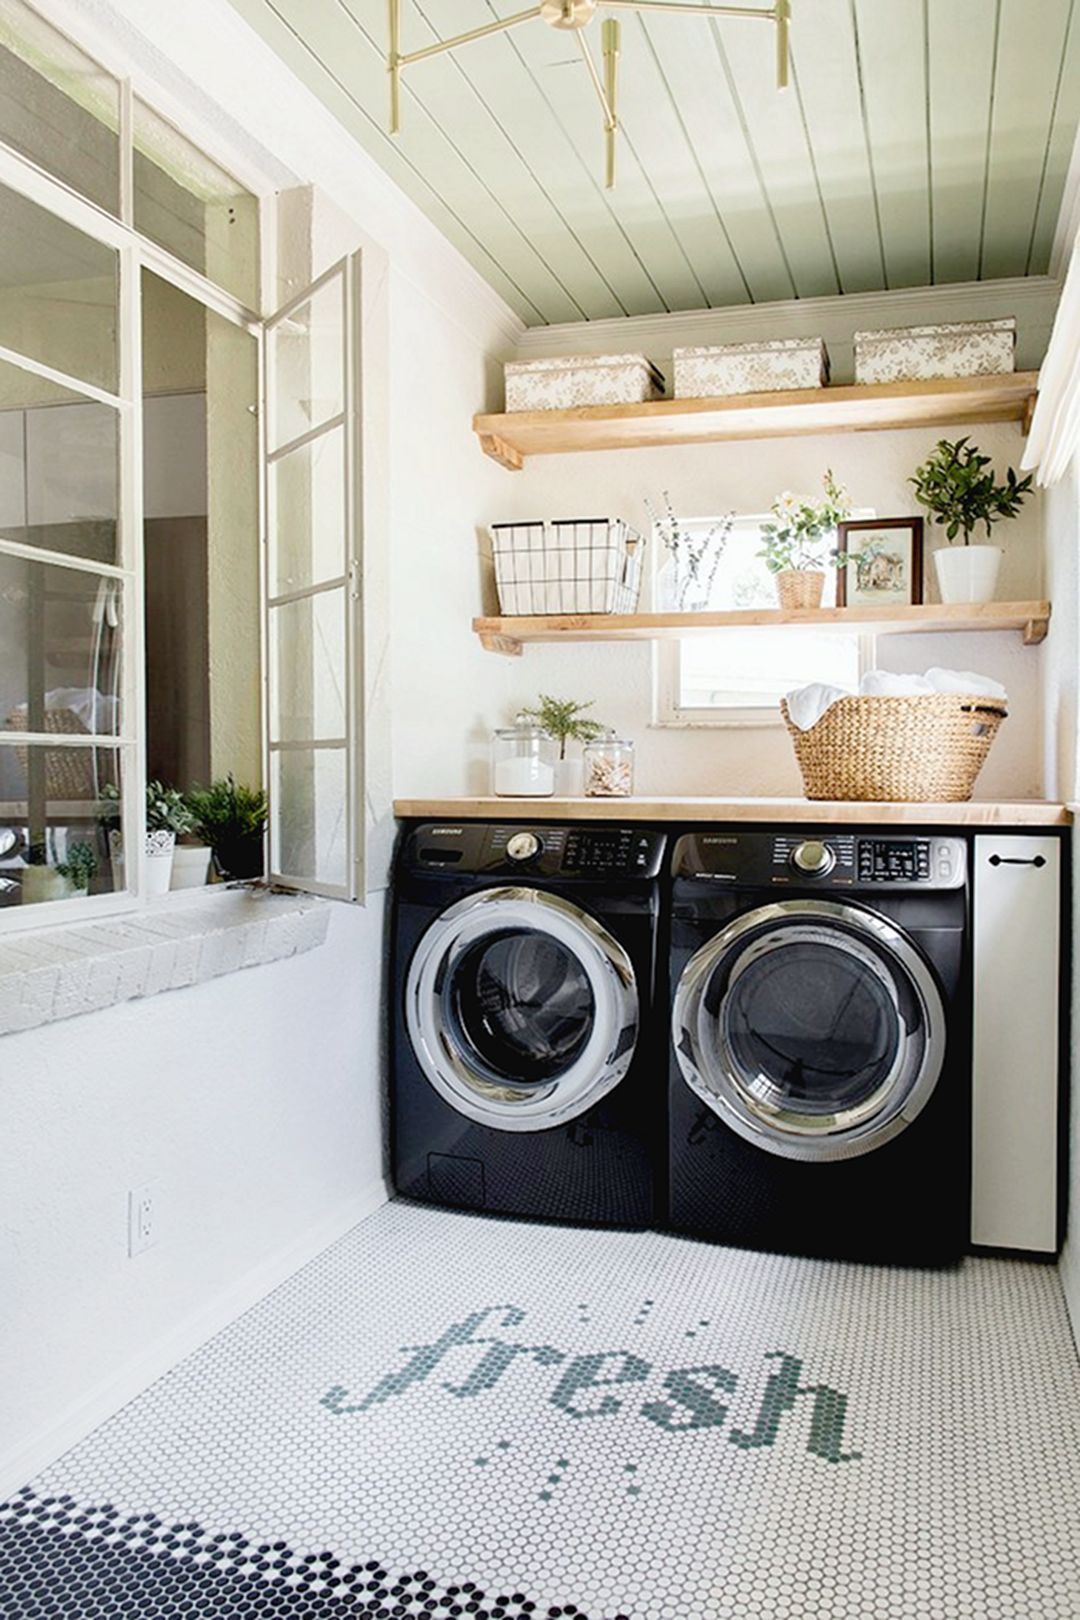 15 Amazing Small Laundry Room Tricks On A Budget - Homagz